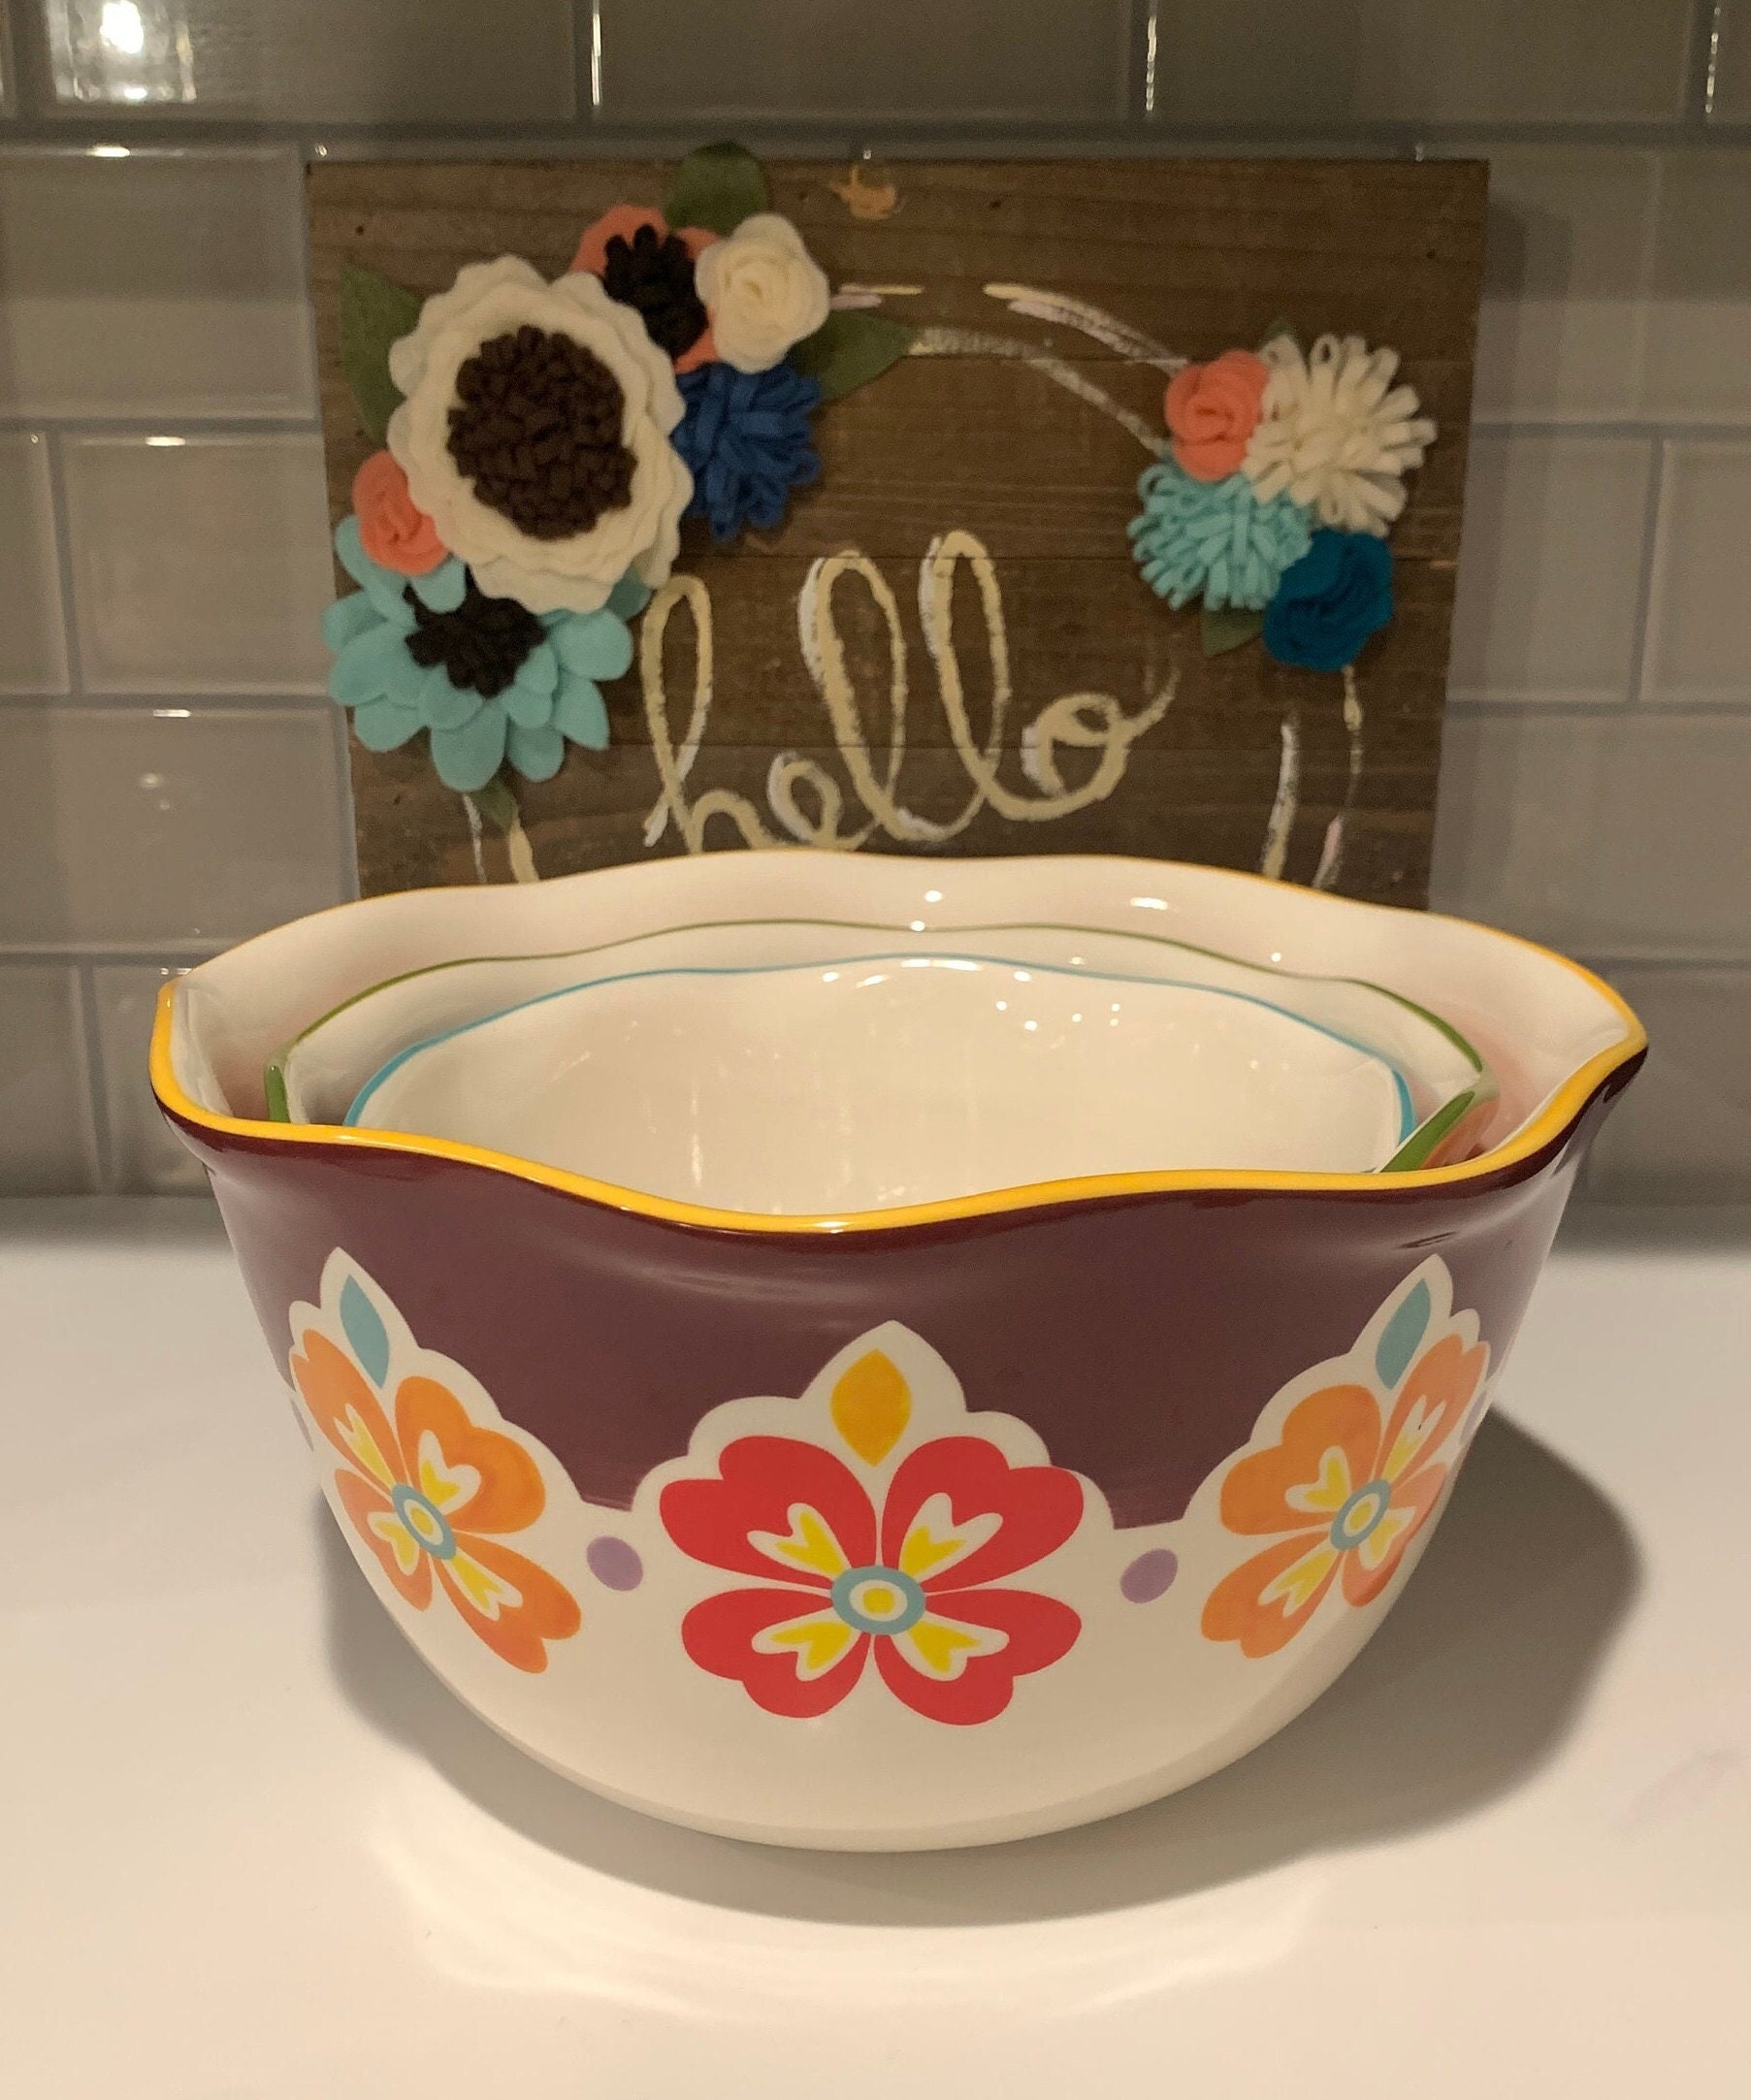 The Pioneer Woman Sweet Rose 12-inch Ceramic Batter Mixing Bowl with Spout